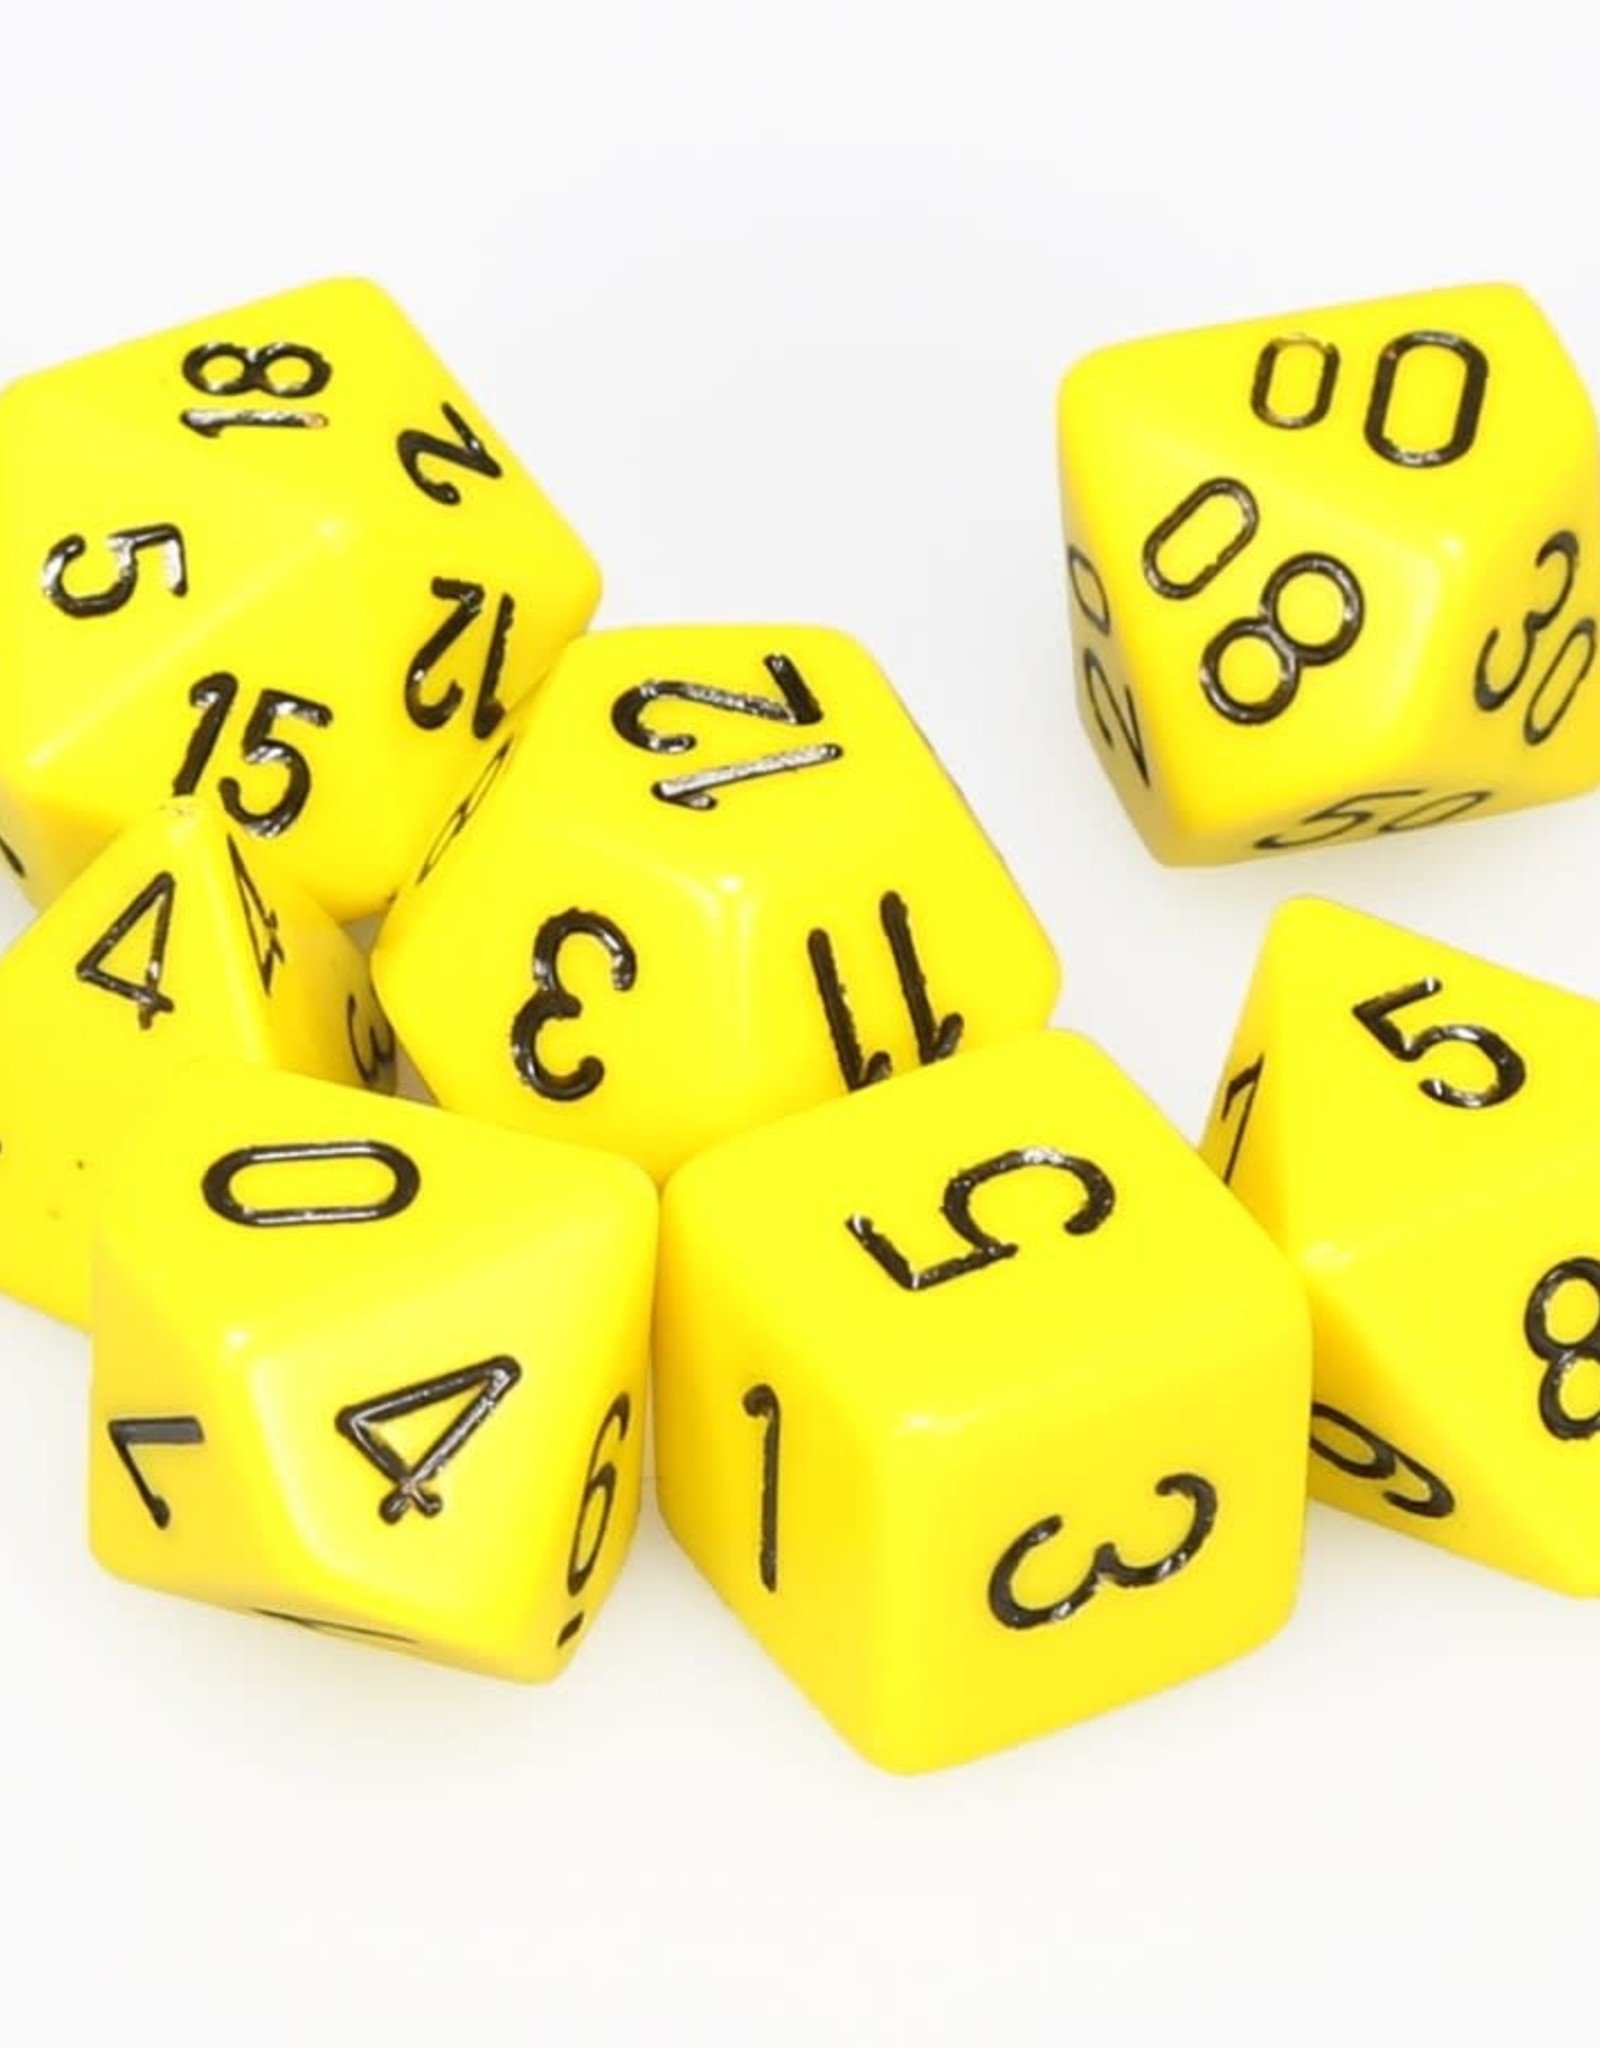 Chessex CHX Opaque Dice: Yellow/Black Poly 7-Die Set 25402